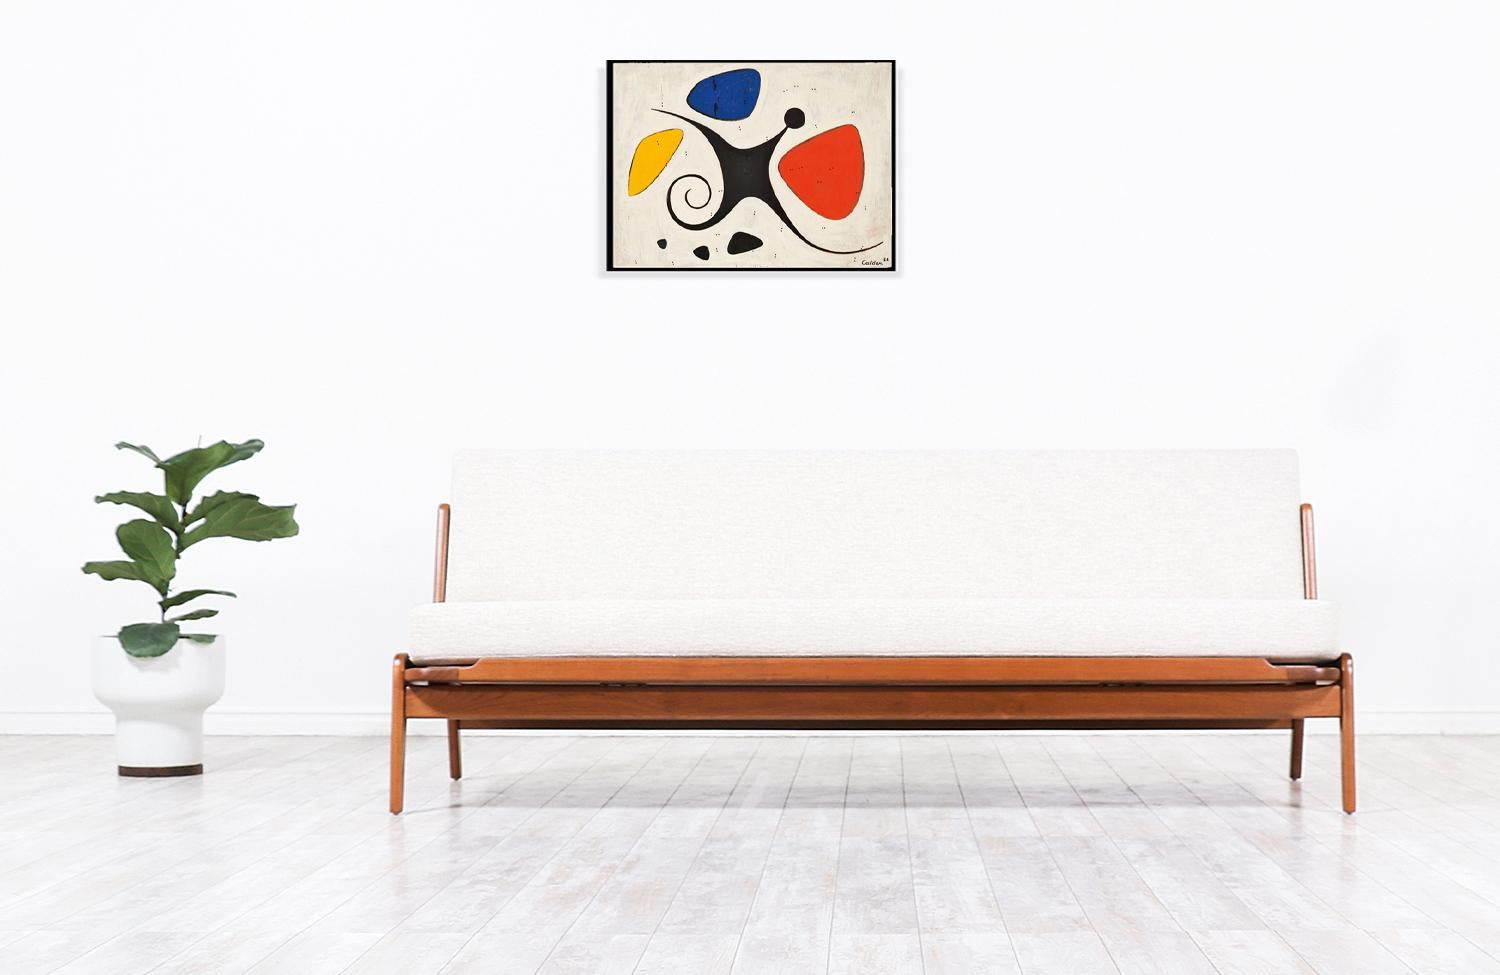 Elegant Mid-Century Modern sofa designed by Danish architect and designer Arne Wahl Iversen for Komfort in Denmark circa 1960s. This comfortable design features a quality crafted teak wood base with geometric shapes and a perfectly balanced seat